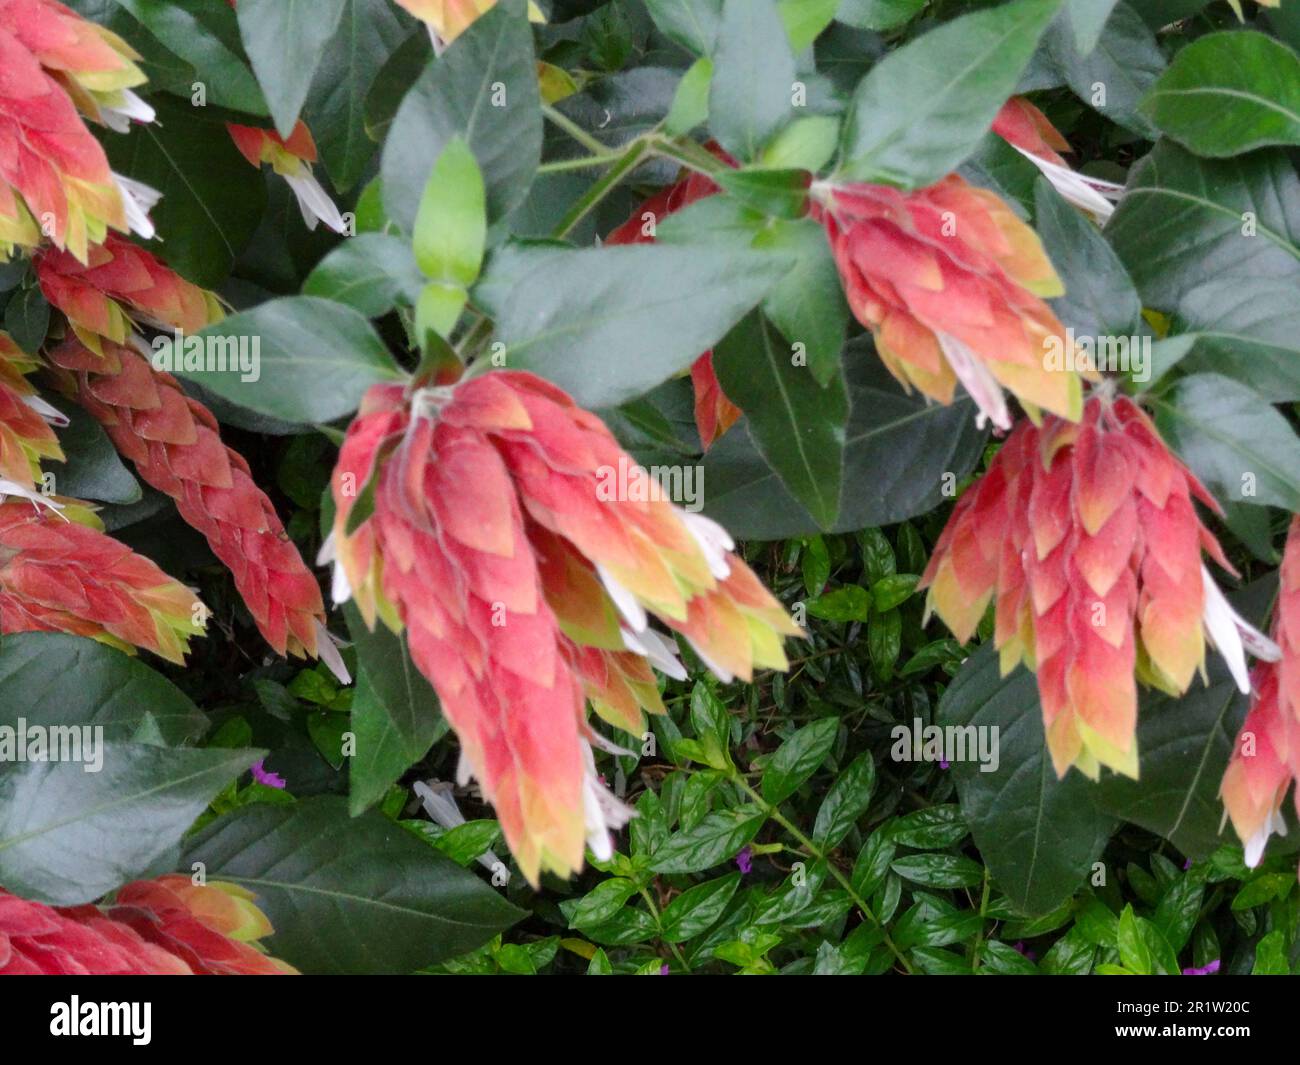 Natural close up flowering plant portrait of pretty Mexican shrimp plant, Justicia brandegeeana, flowering Stock Photo